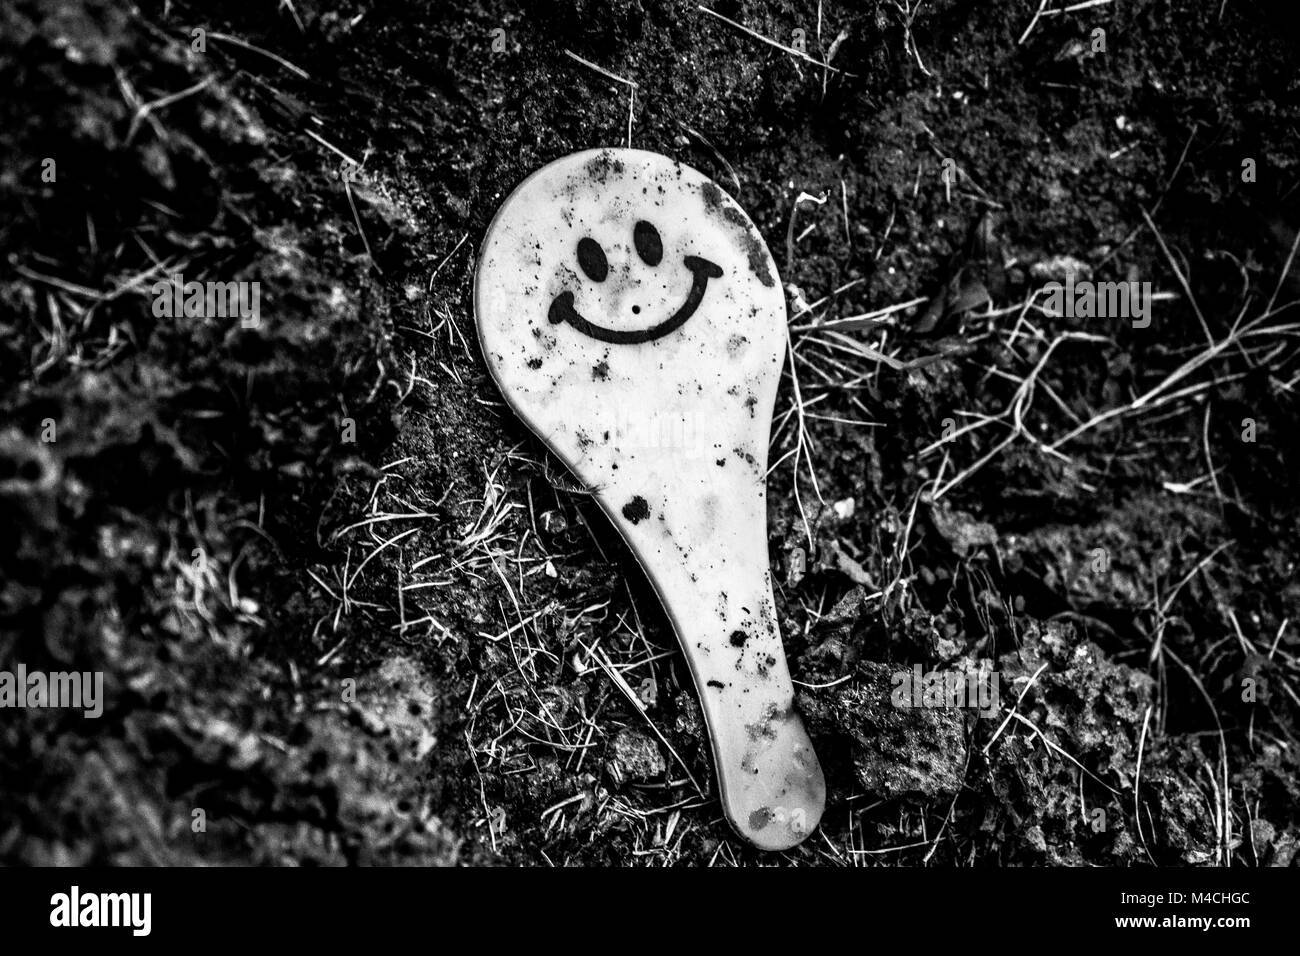 Smiley face. Black and white. Stock Photo